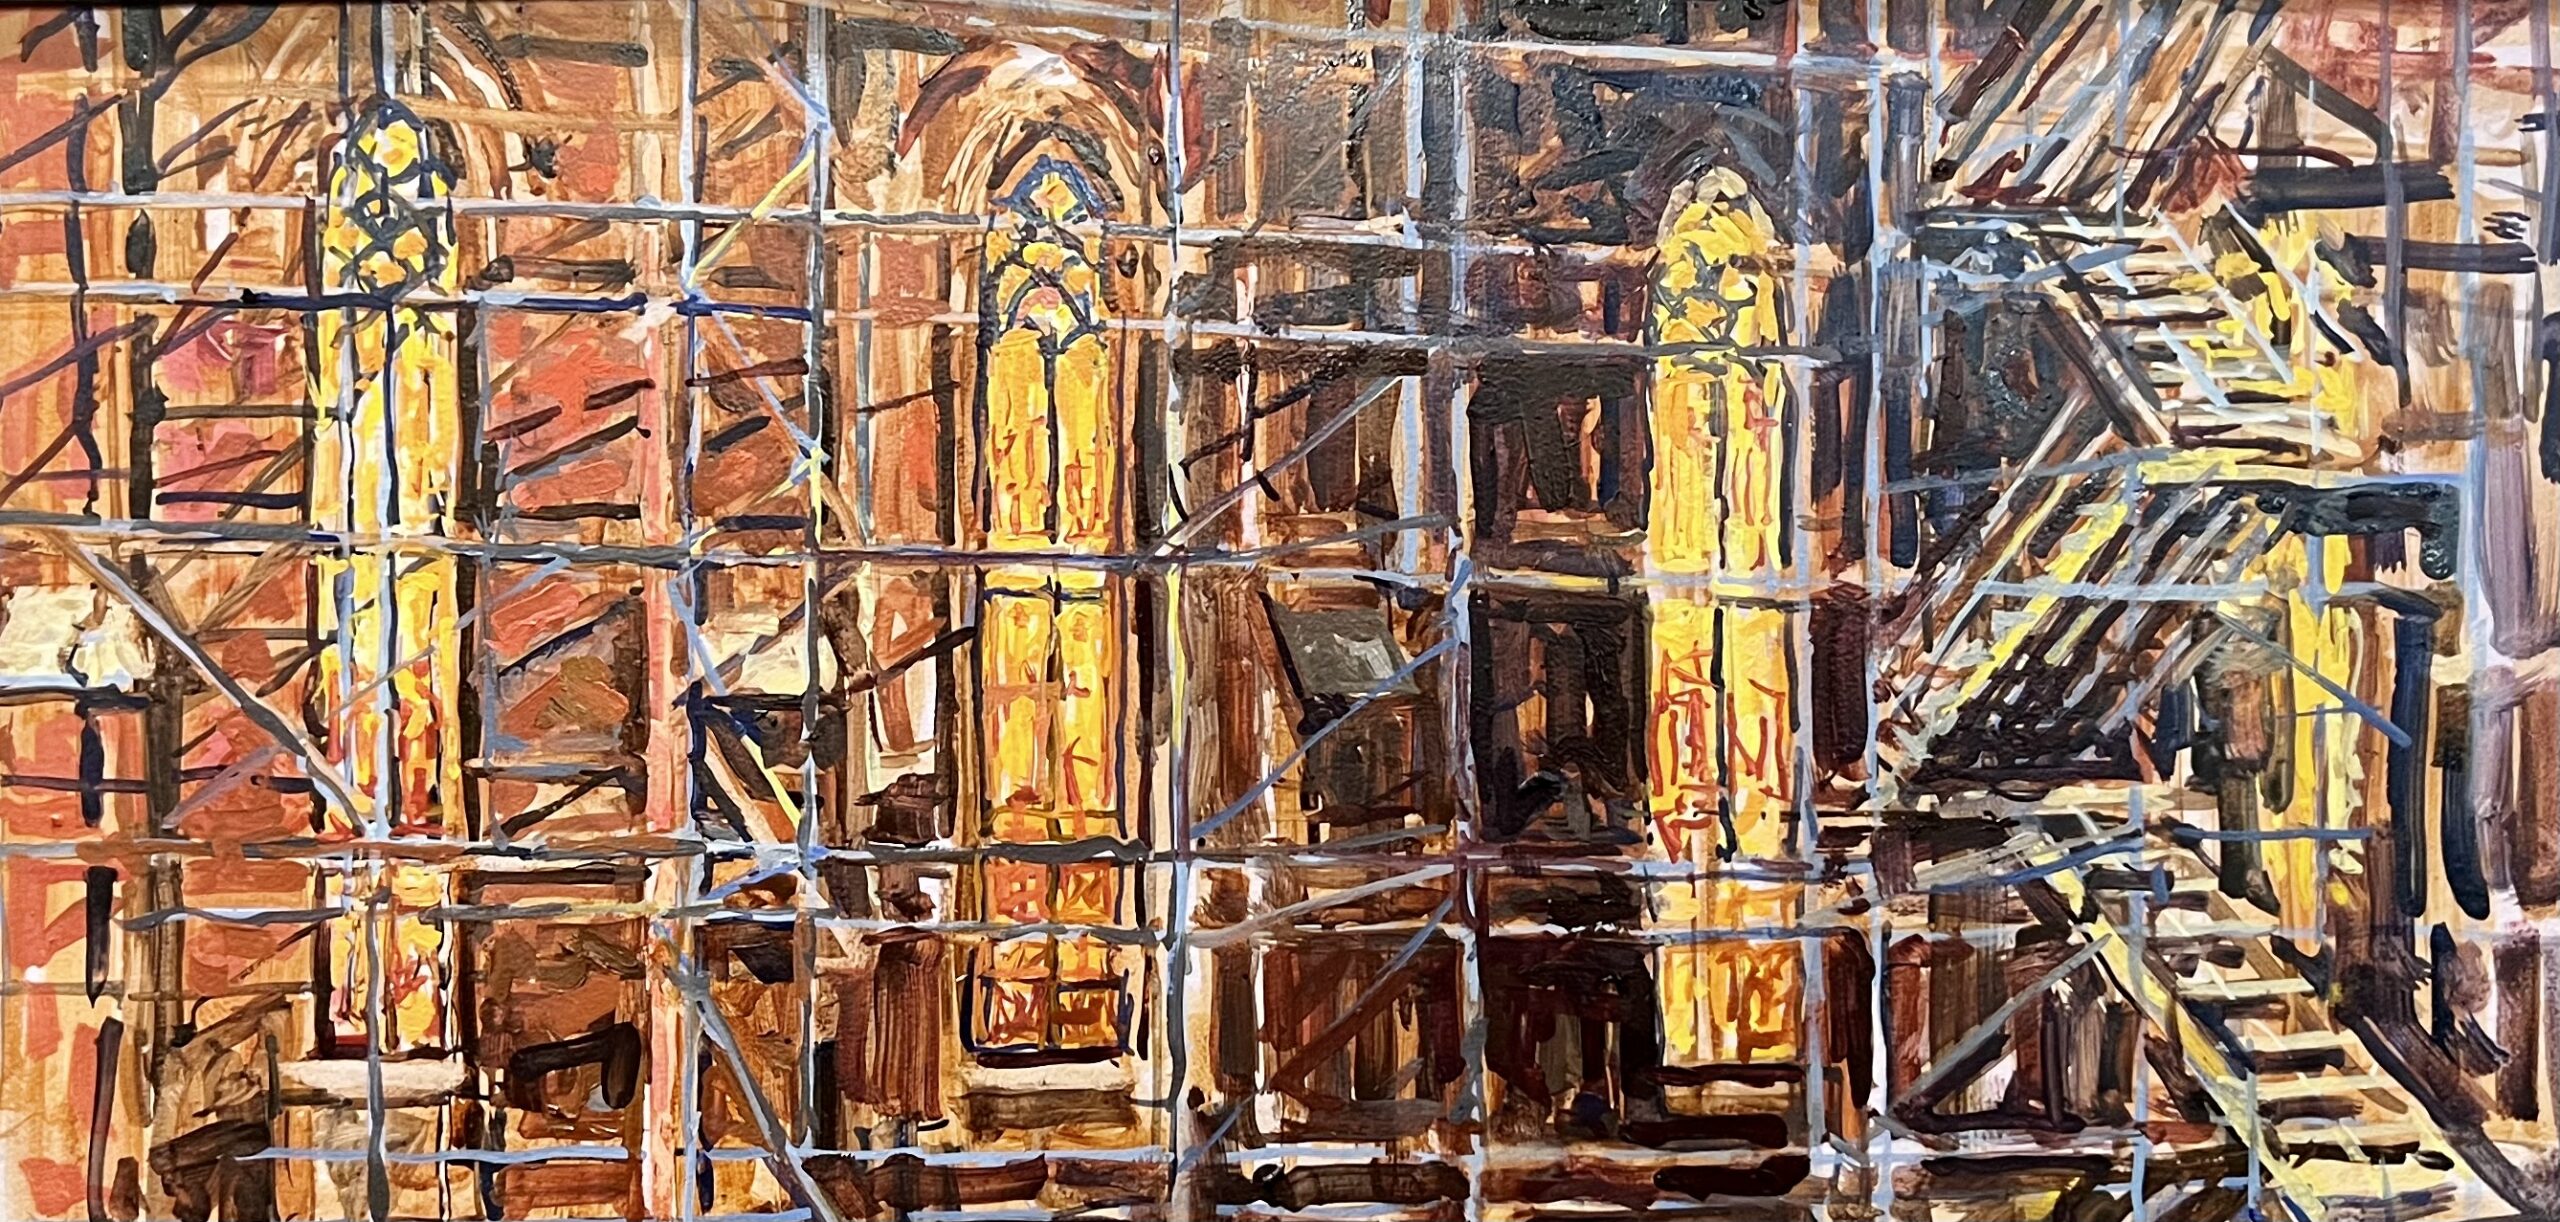 Main Event, First Place: "Scaffolding vs. Stained Glass" by Troy Tatlock